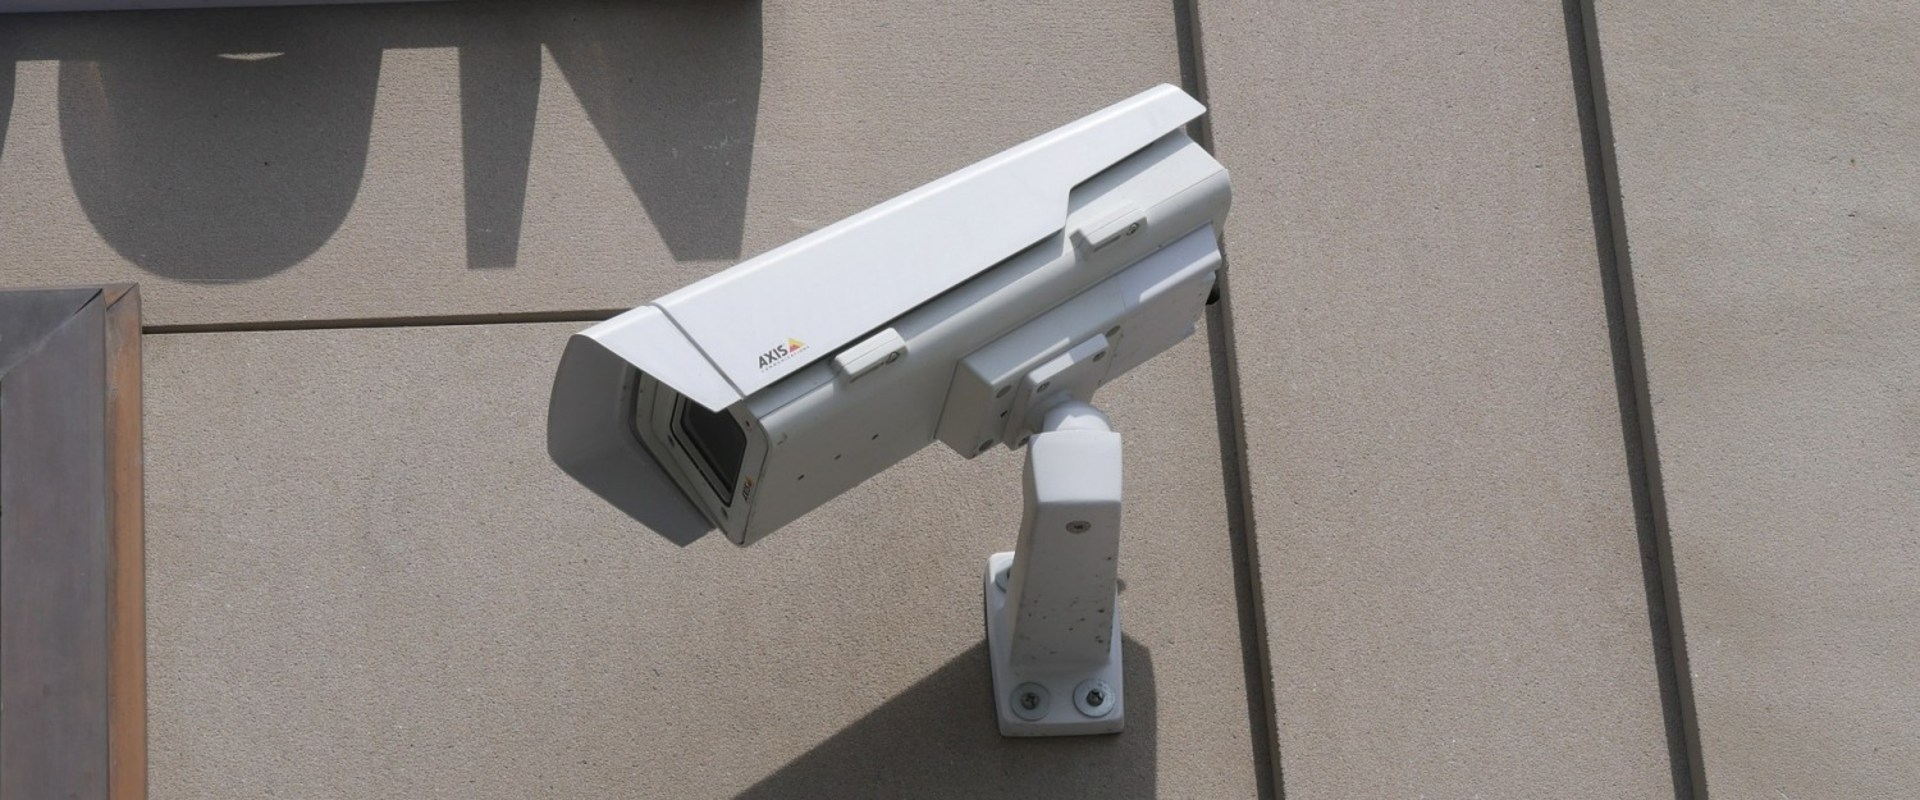 Ease of Use and Maintenance Requirements for IP Cams